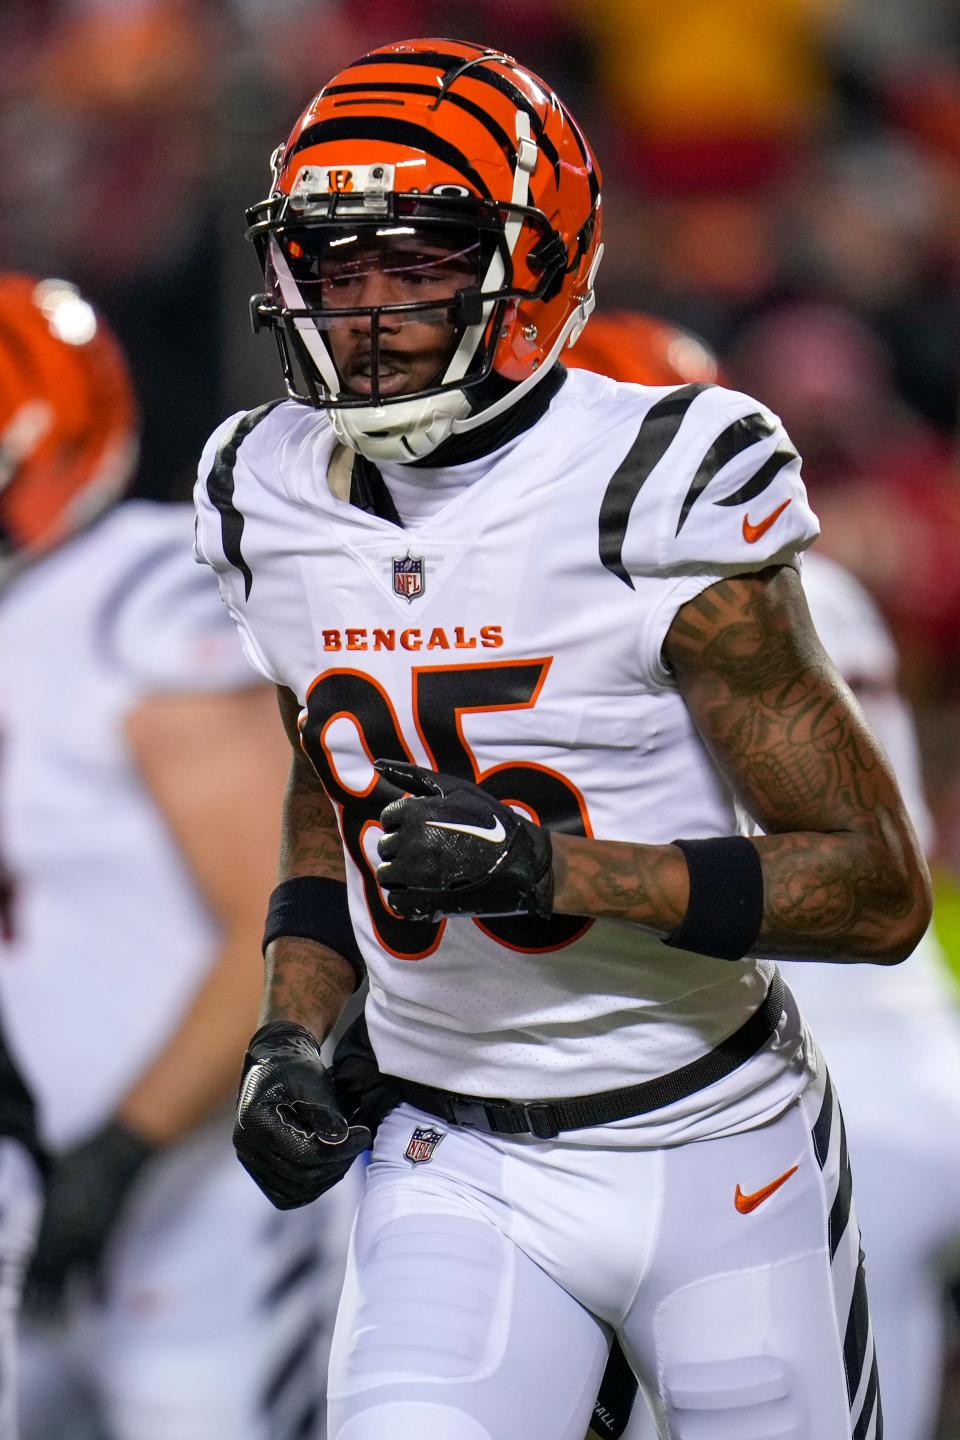 Cincinnati Bengals wide receiver Tee Higgins has recorded back-to-back 1,000-yard seasons. He is eligible for a contract extension this offseason.